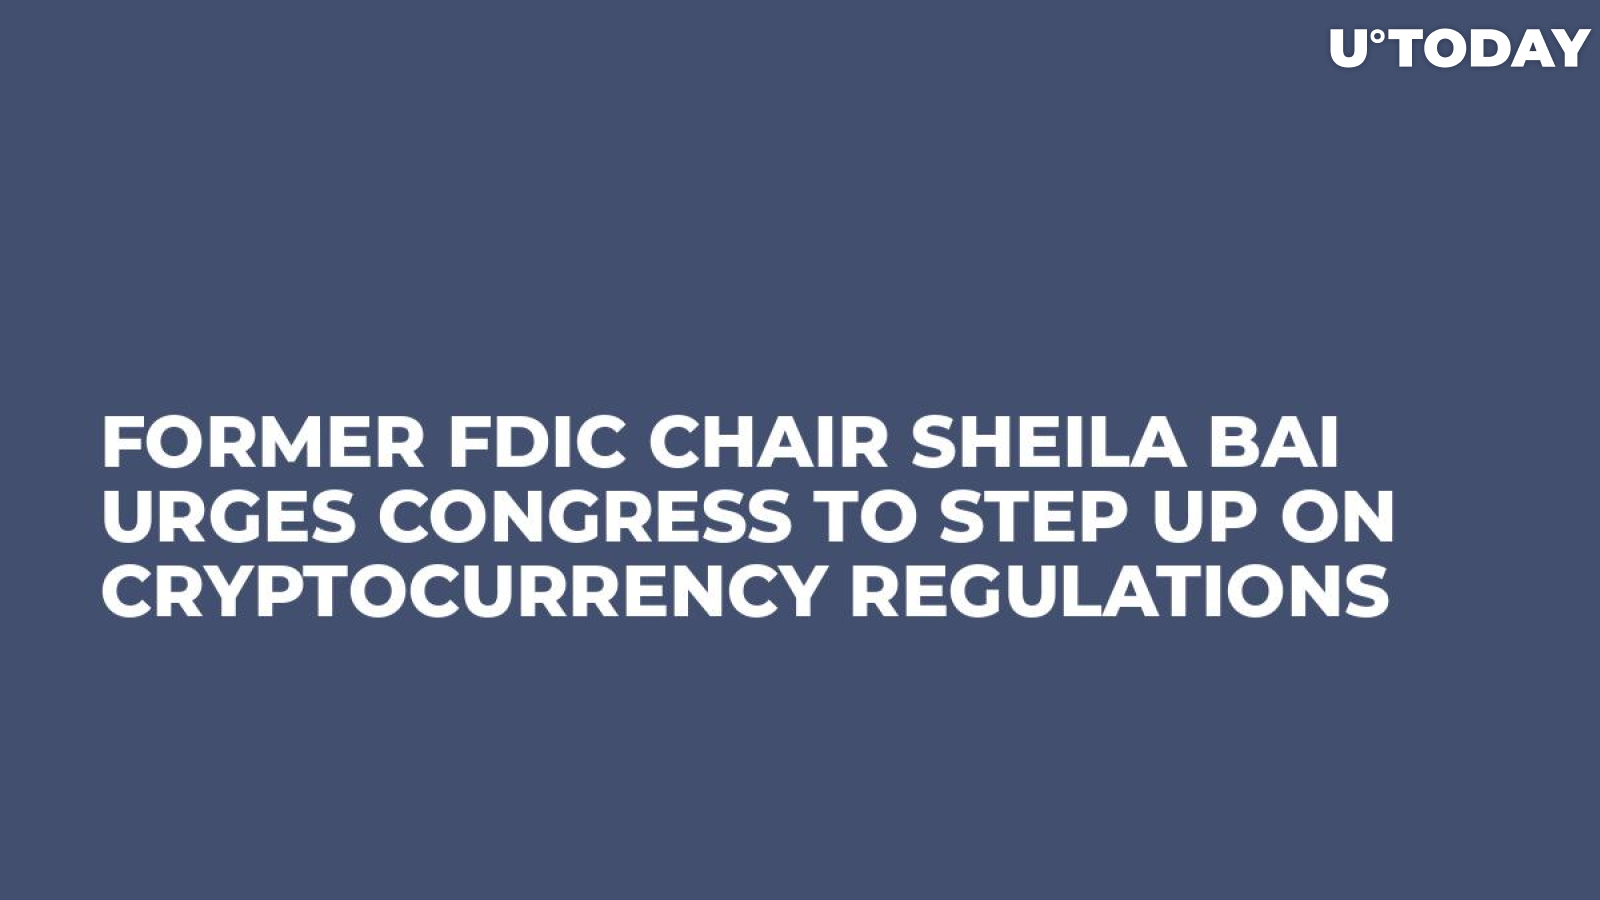 Former FDIC Chair Sheila Bai Urges Congress to Step Up on Cryptocurrency Regulations